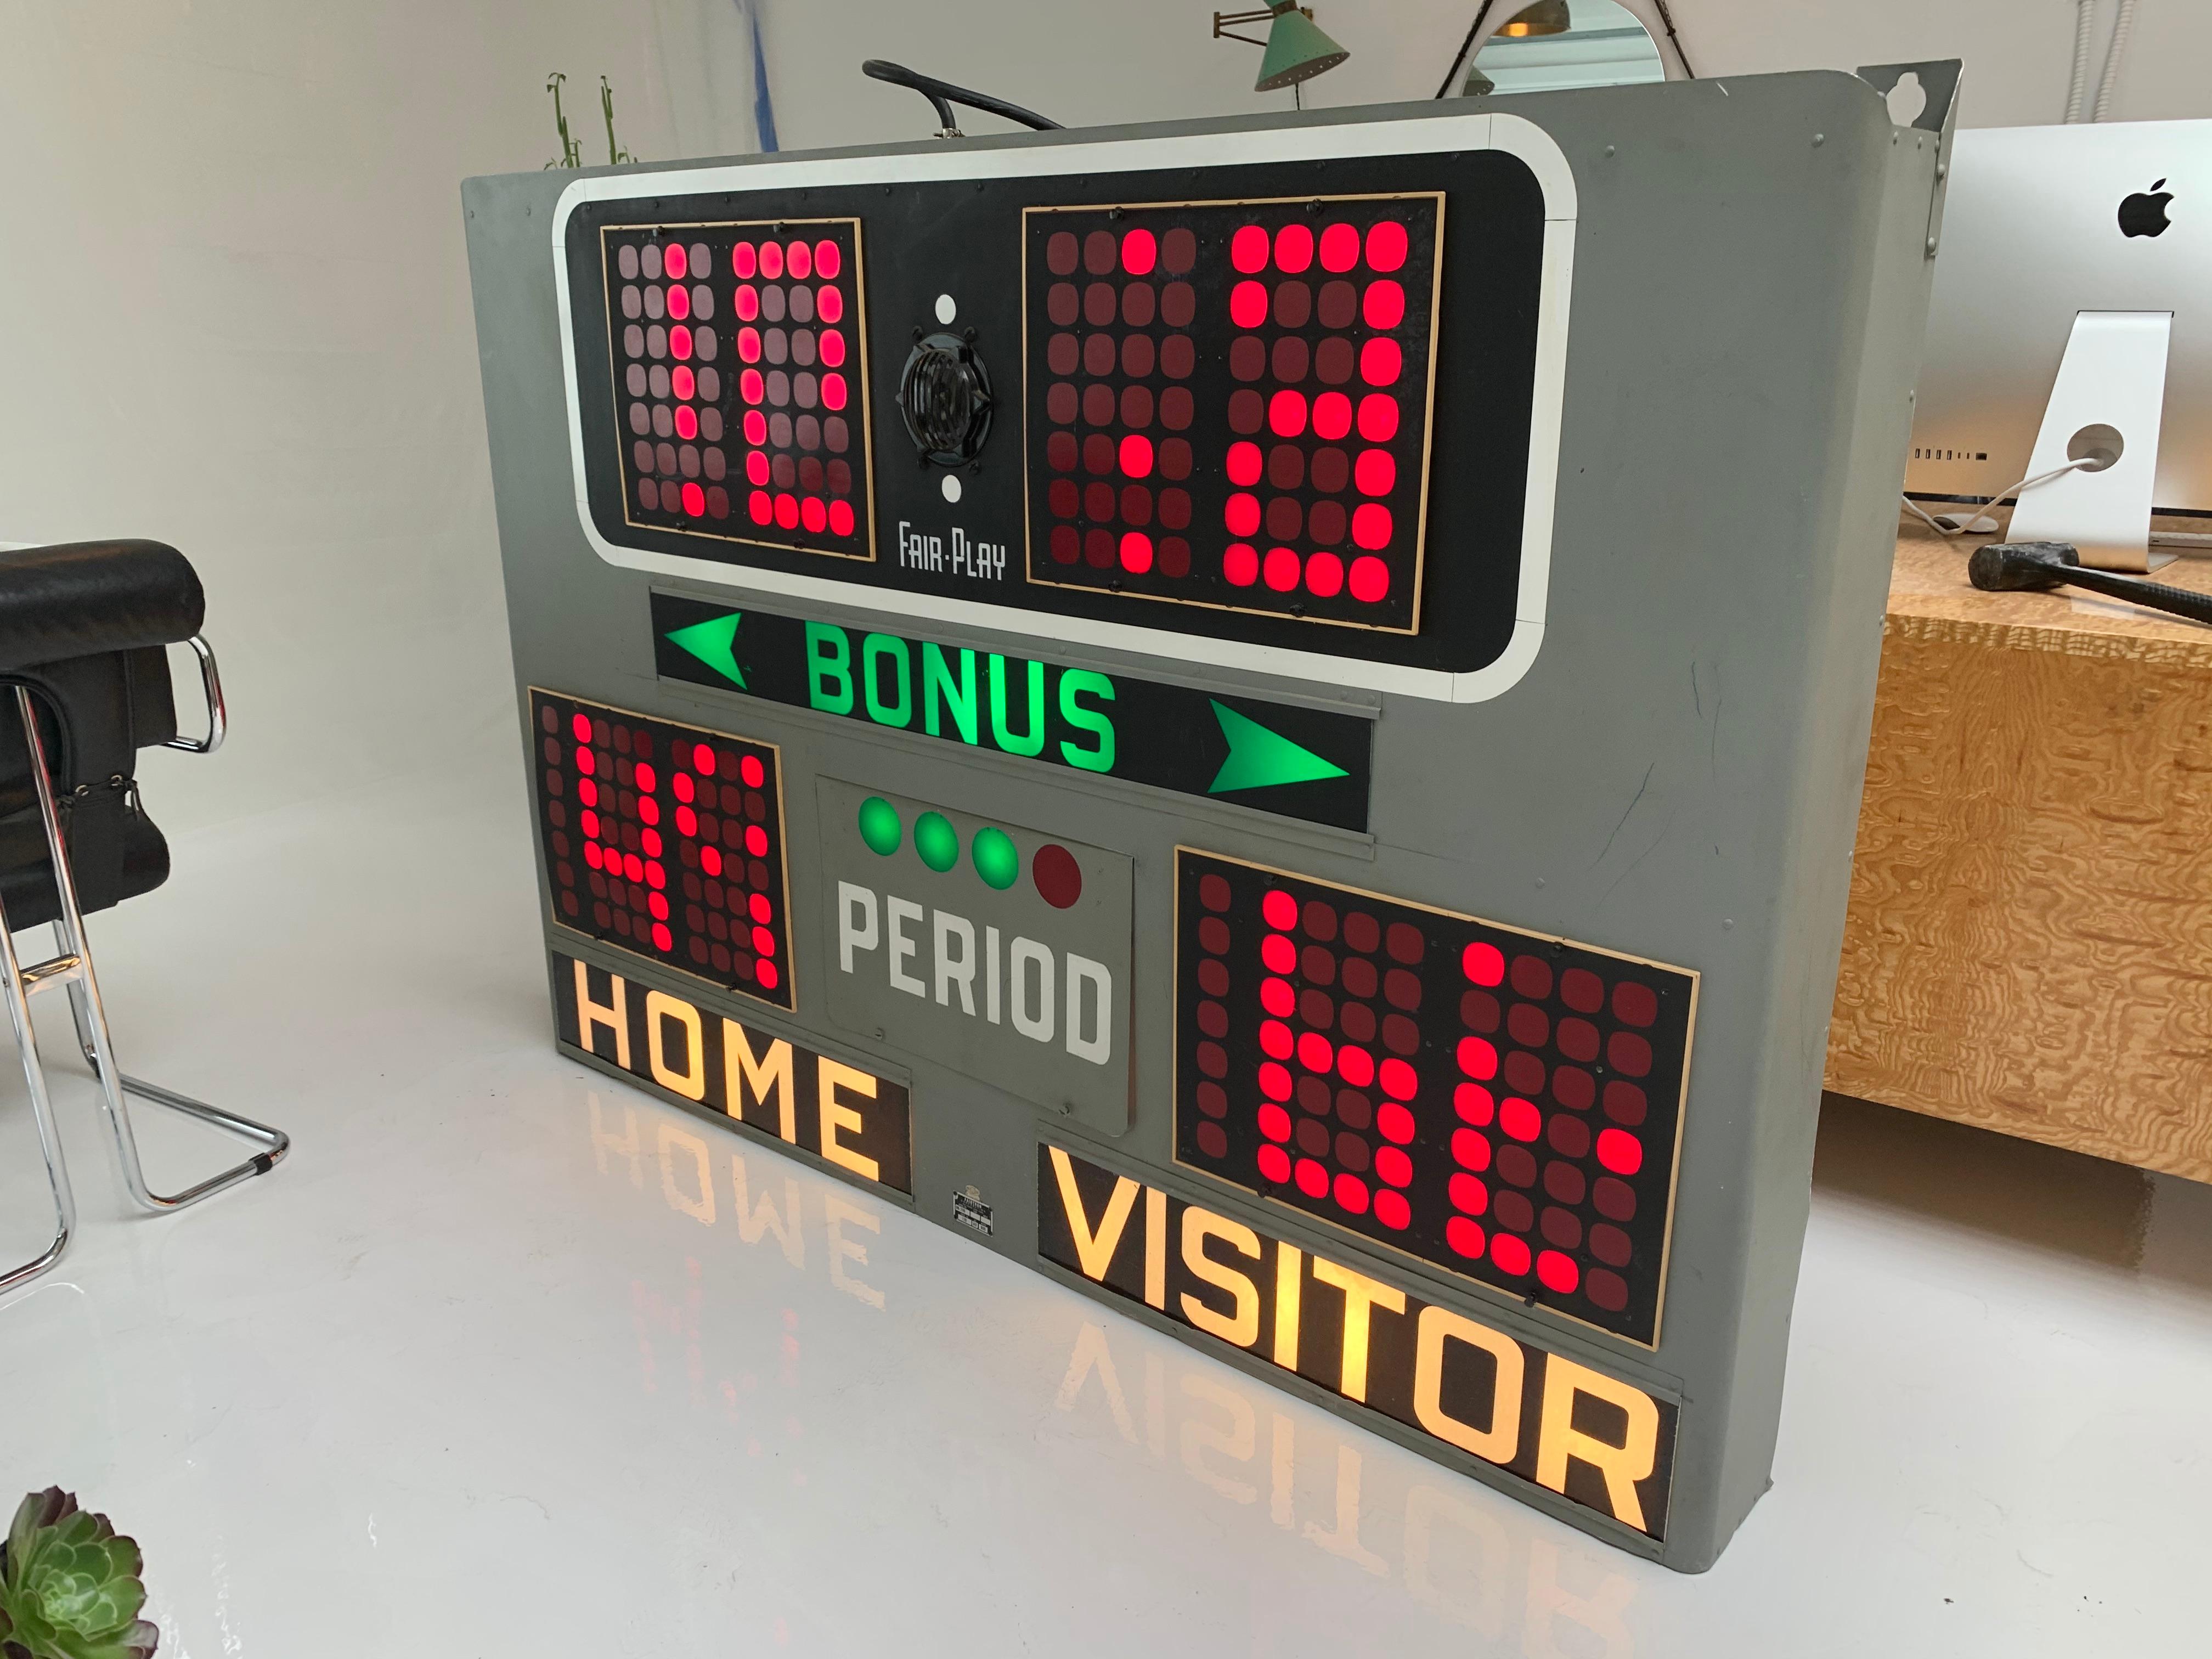 Fun vintage basketball scoreboard by Fair Play, made in the 1960s. Really cool grey metal frame with green, red and white coloring. In full working order, with timer, shot-clock, bonus section, score and working horn. Each movement of the board is